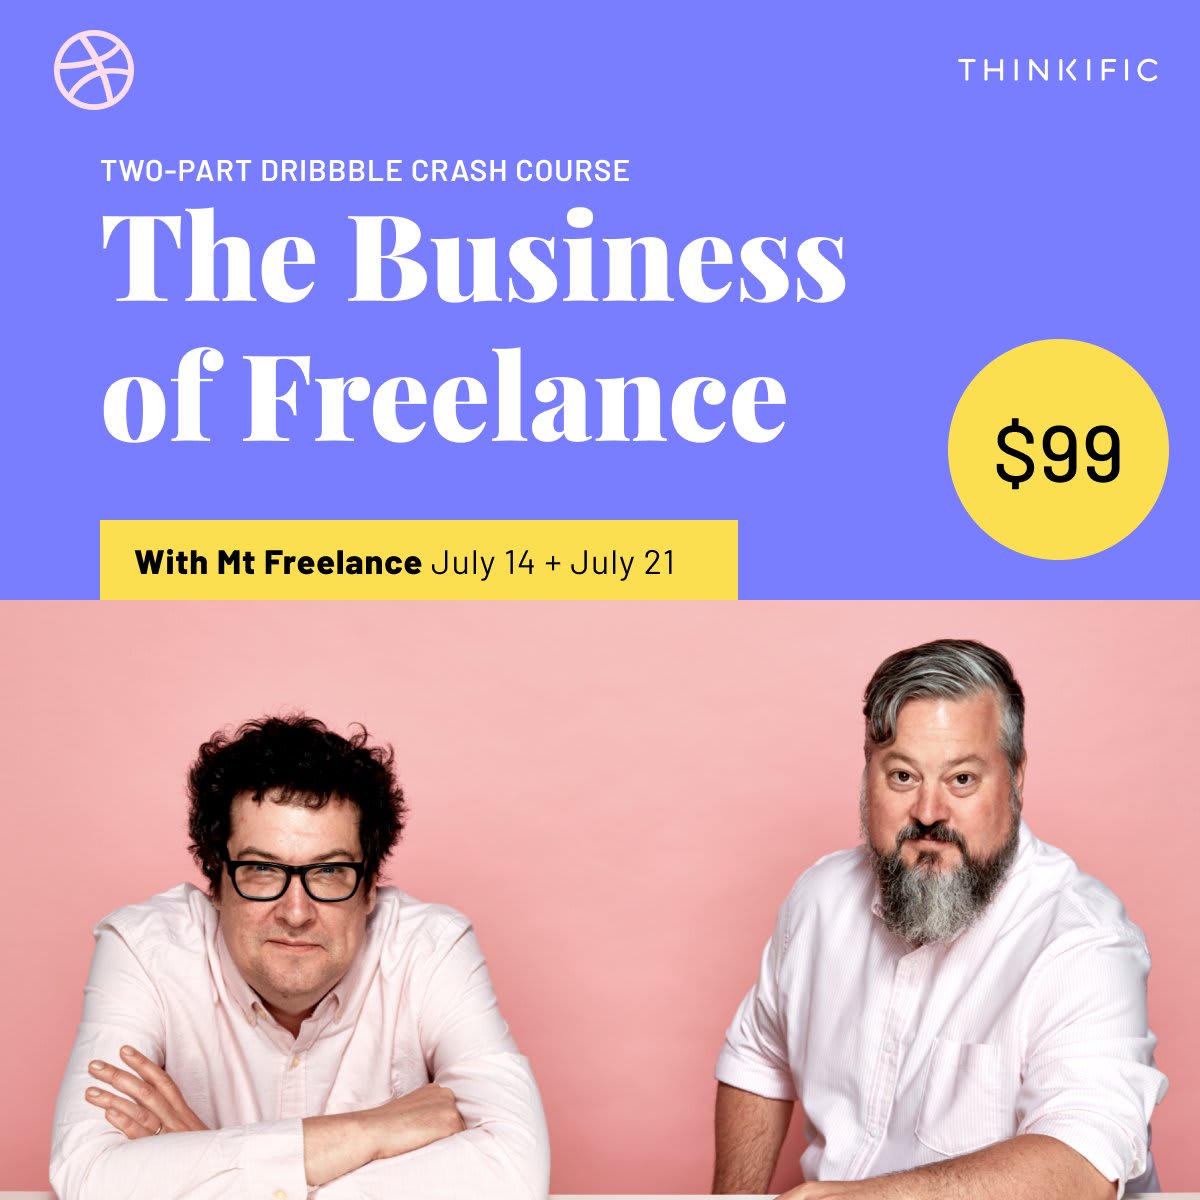 Ever thought about doubling your current freelance rate ? We've teamed up with Mt.Freelance to bring you a 2-part crash course on how to charge more and get more of the freelance work you want! Thanks to our sponsors at @thinkific tickets are only $99 –